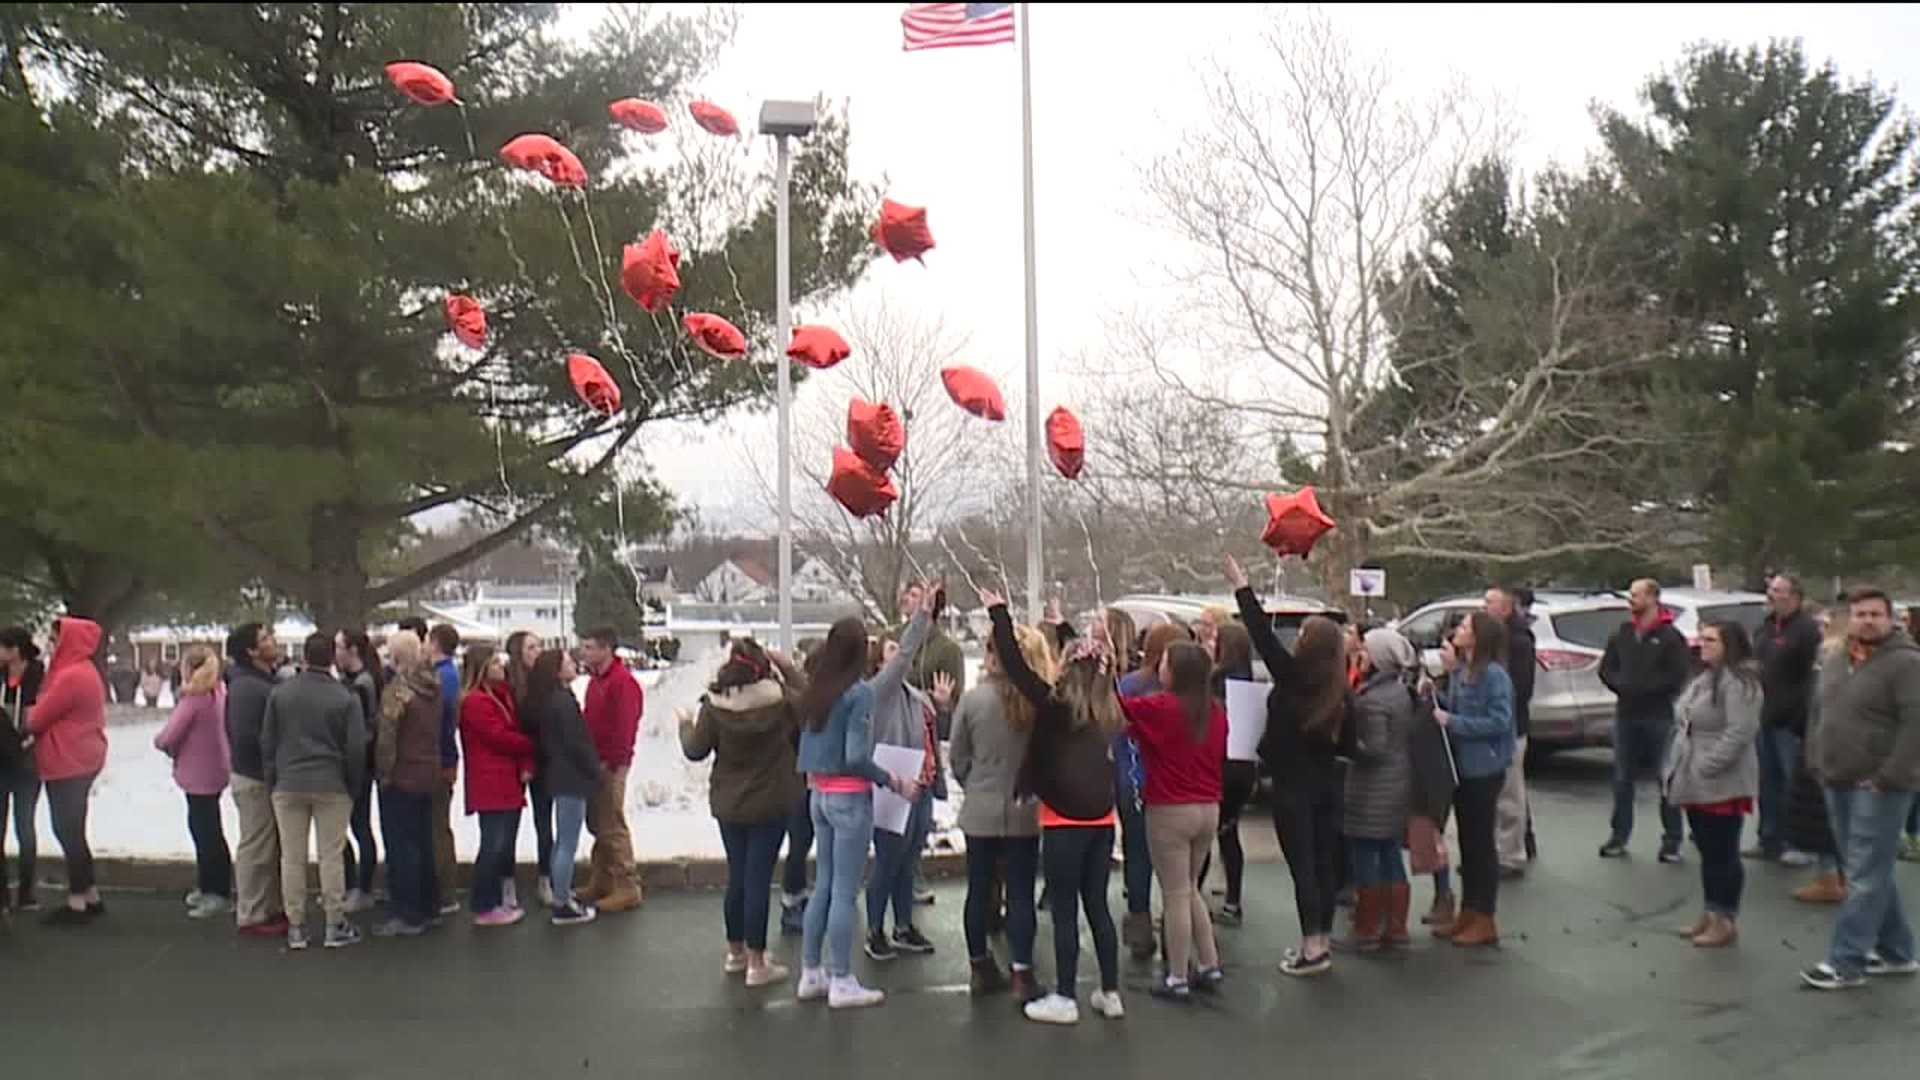 Students at Riverside High School Walk Out for Shooting Victims